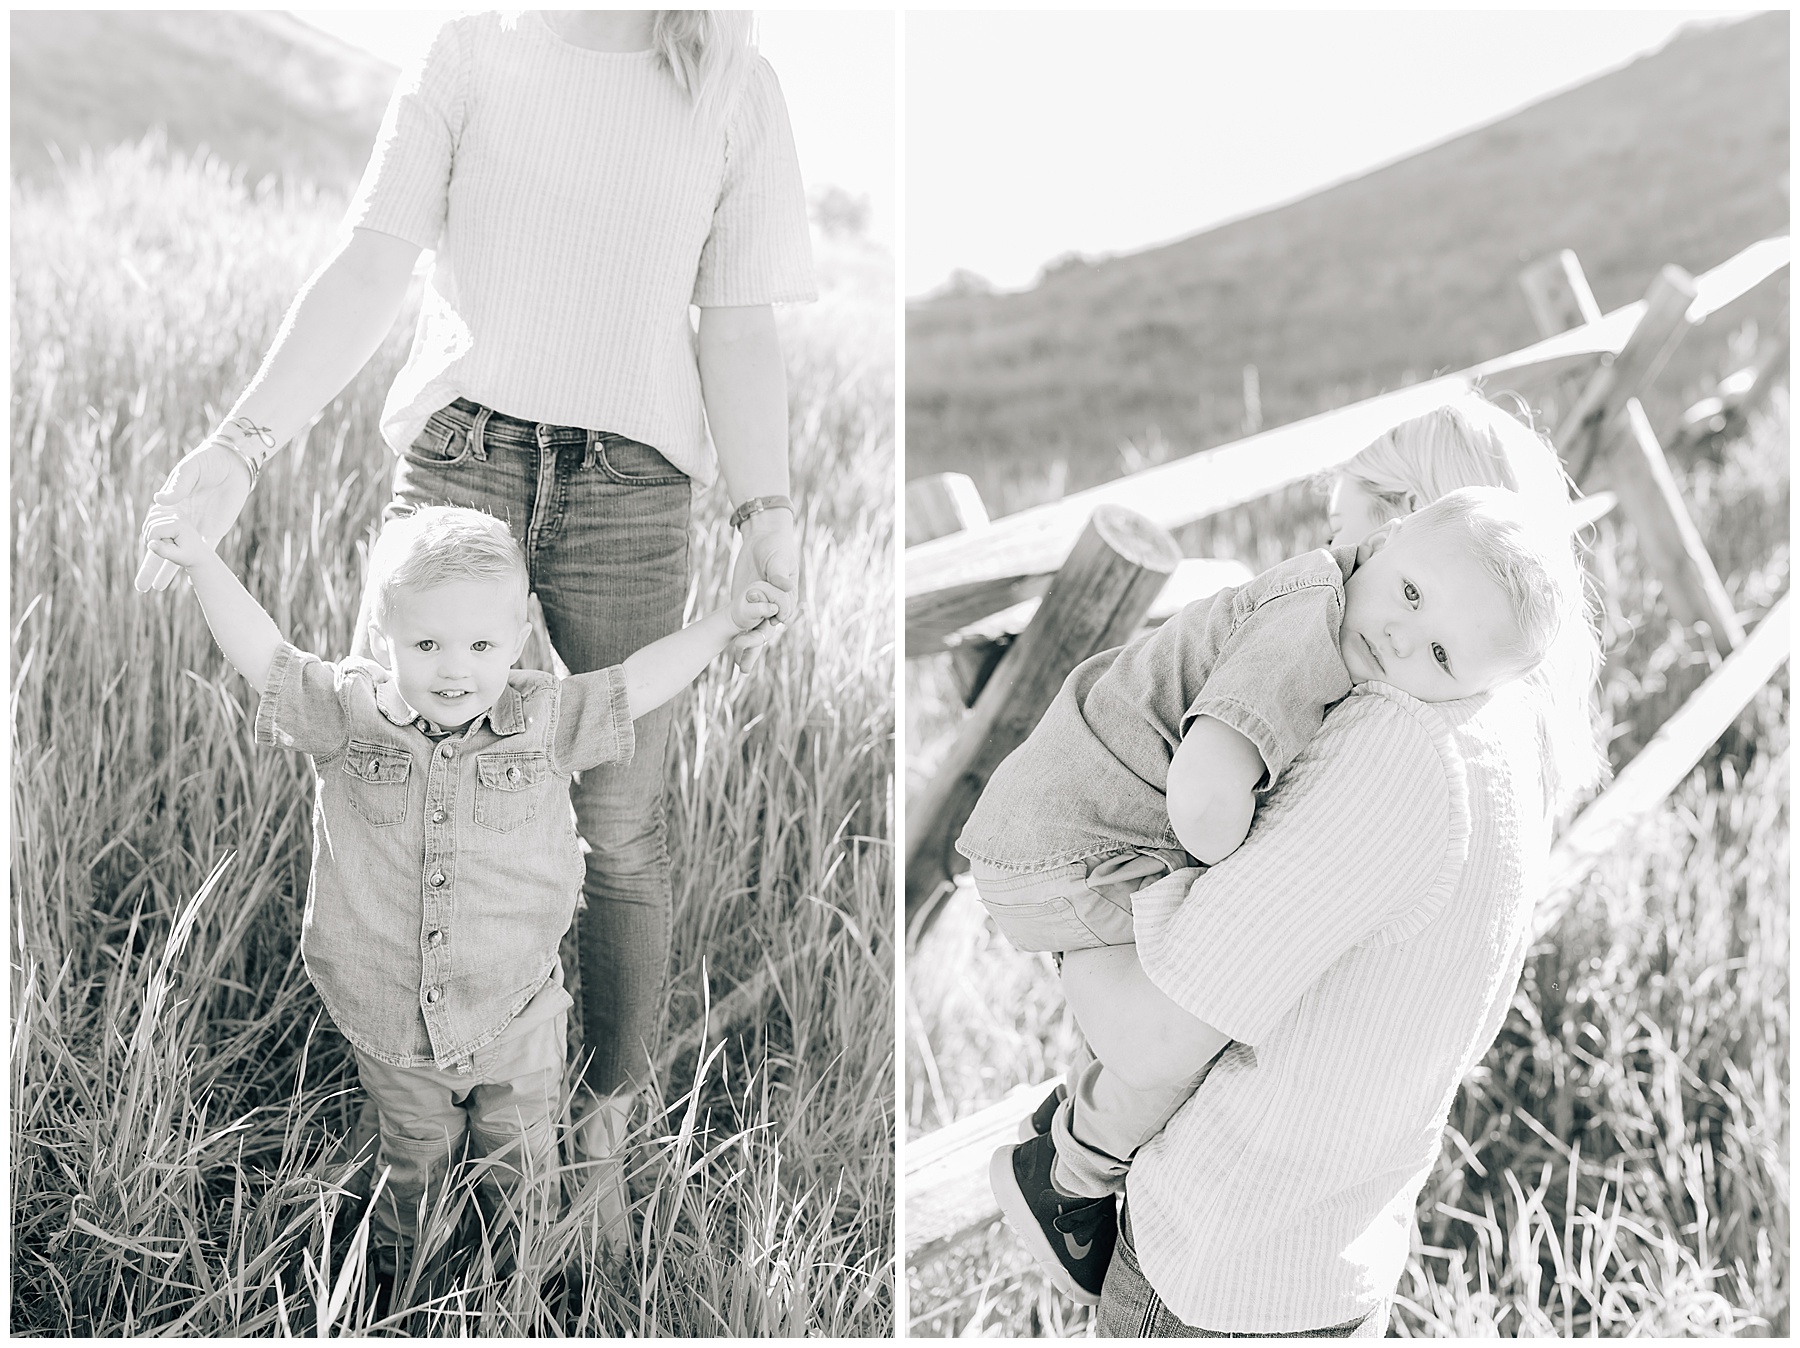 Brown | Tunnel Springs Family Pictures